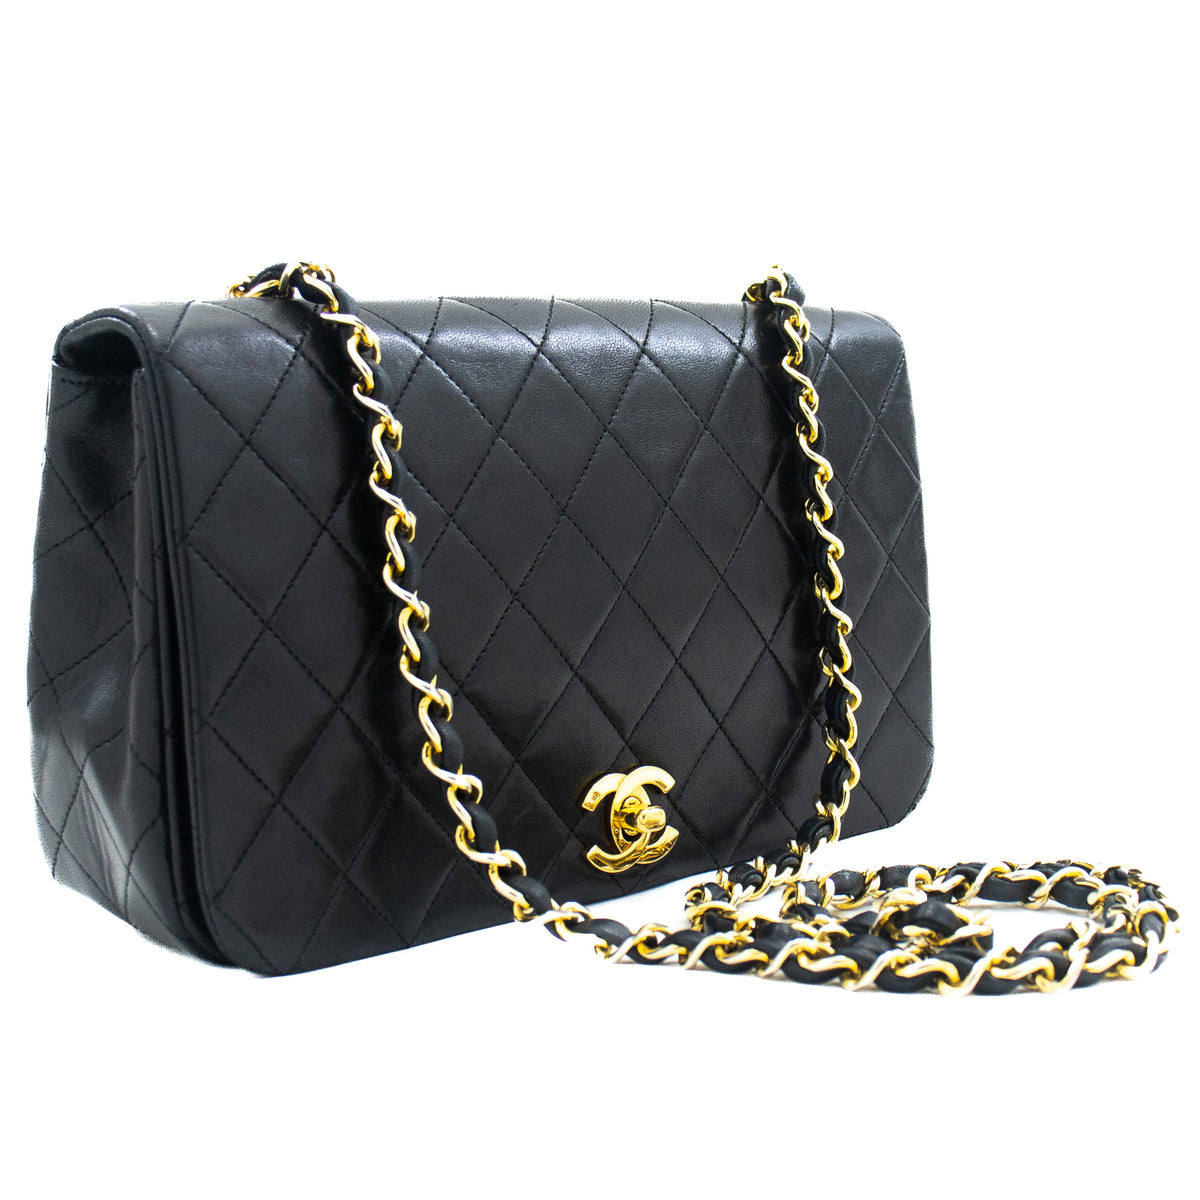 CHANEL Full Flap Chain Shoulder Bag Black Quilted Lambskin